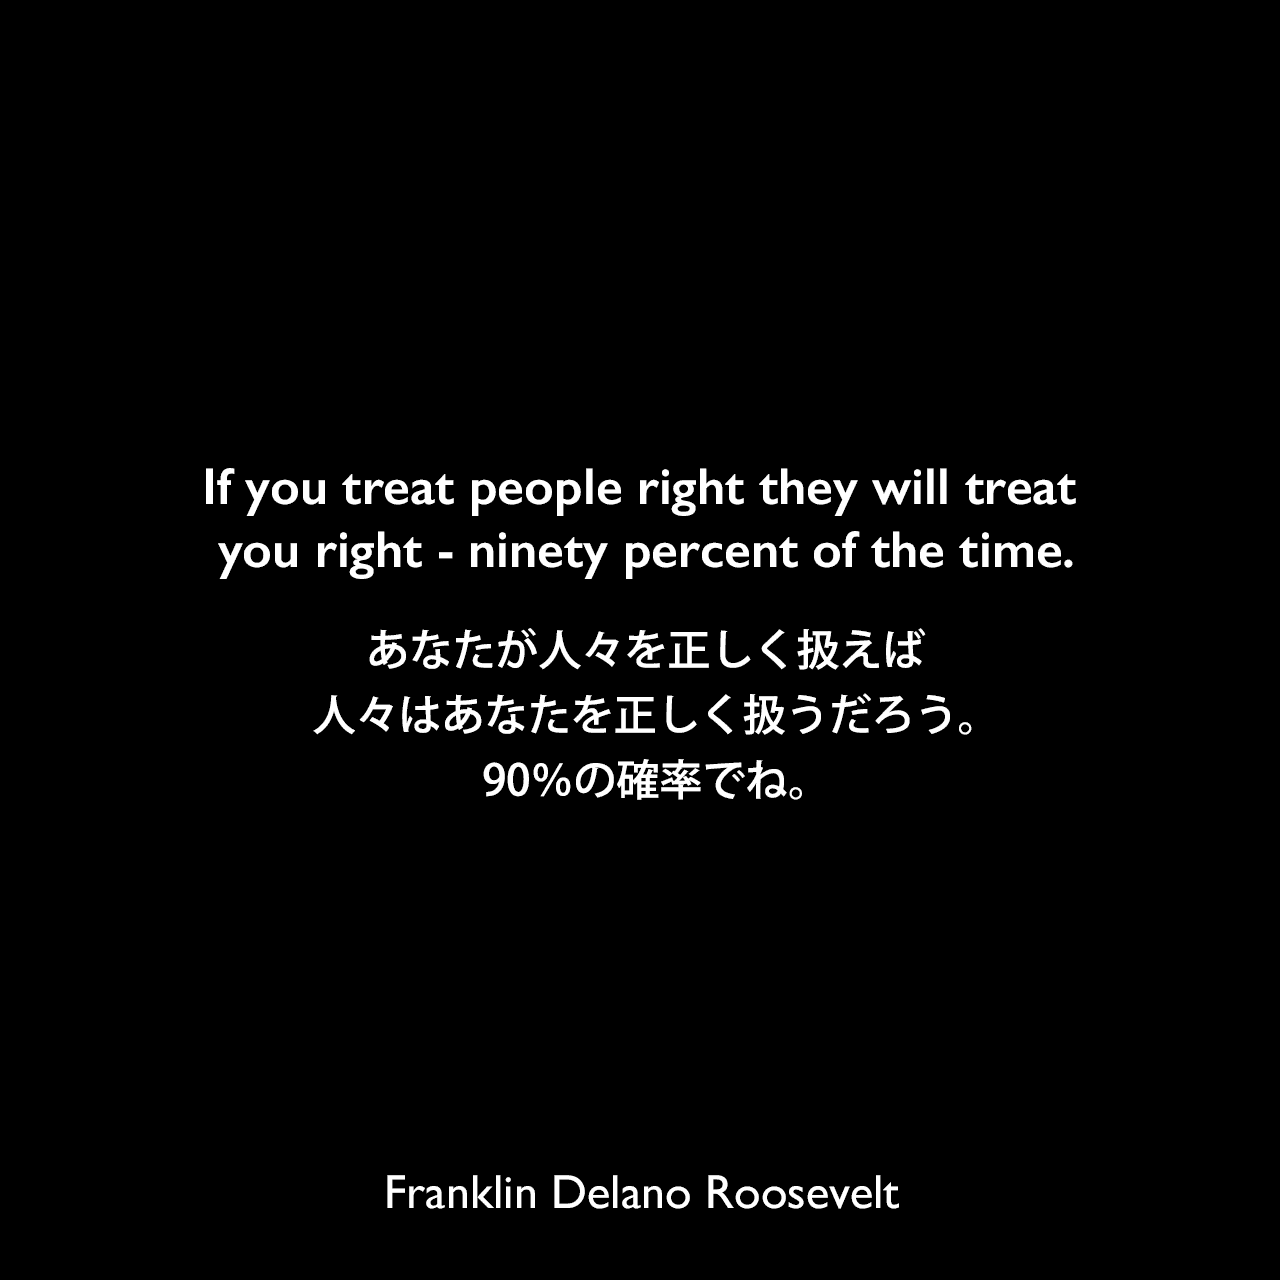 If you treat people right they will treat you right – ninety percent of the time.あなたが人々を正しく扱えば、人々はあなたを正しく扱うだろう。90％の確率でね。